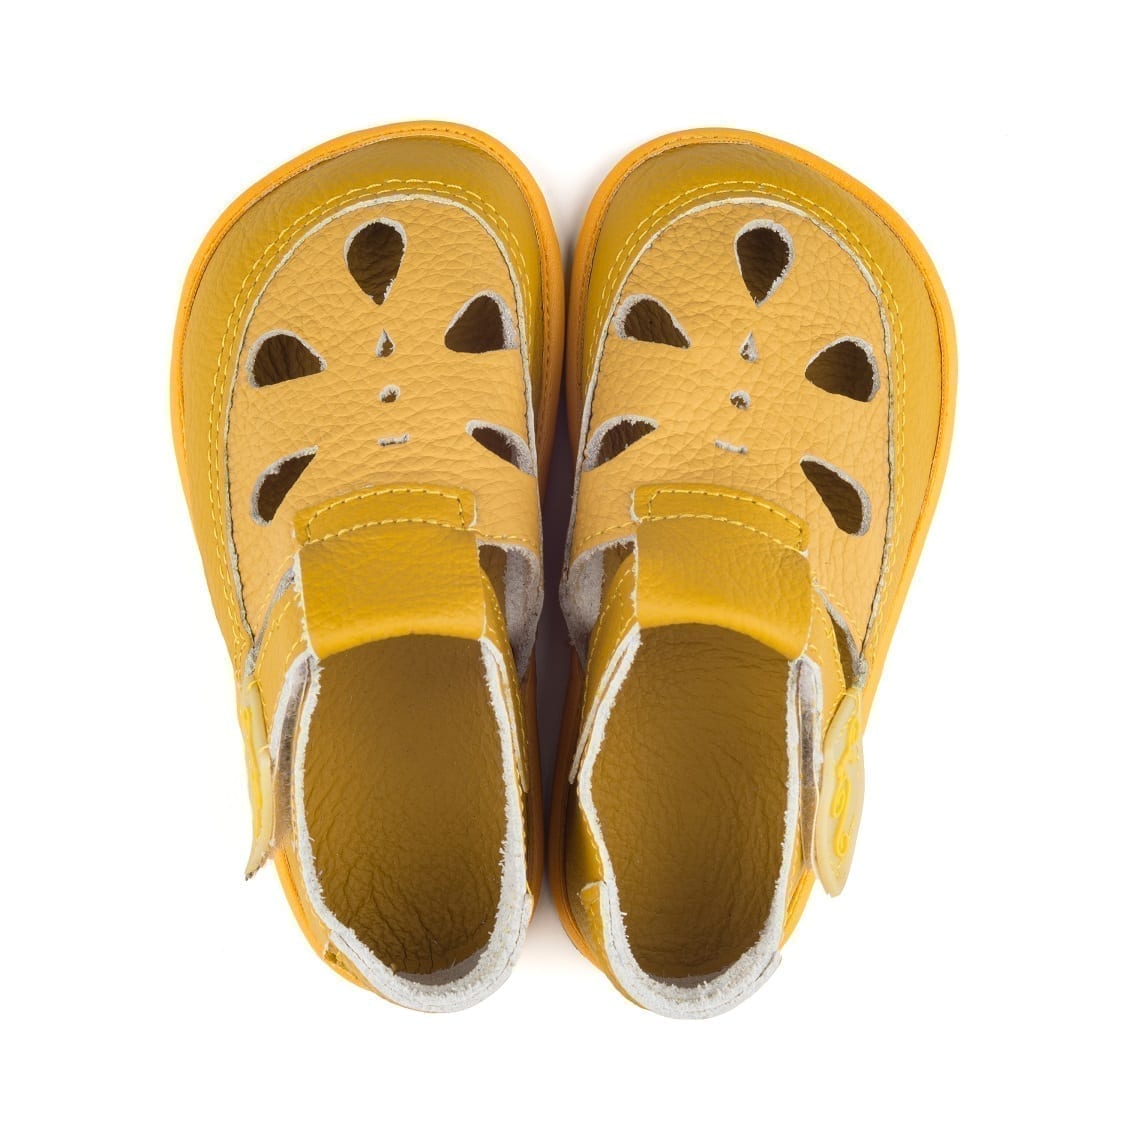 Barefoot shoes for kids COCO YELLOW - Magical Shoes